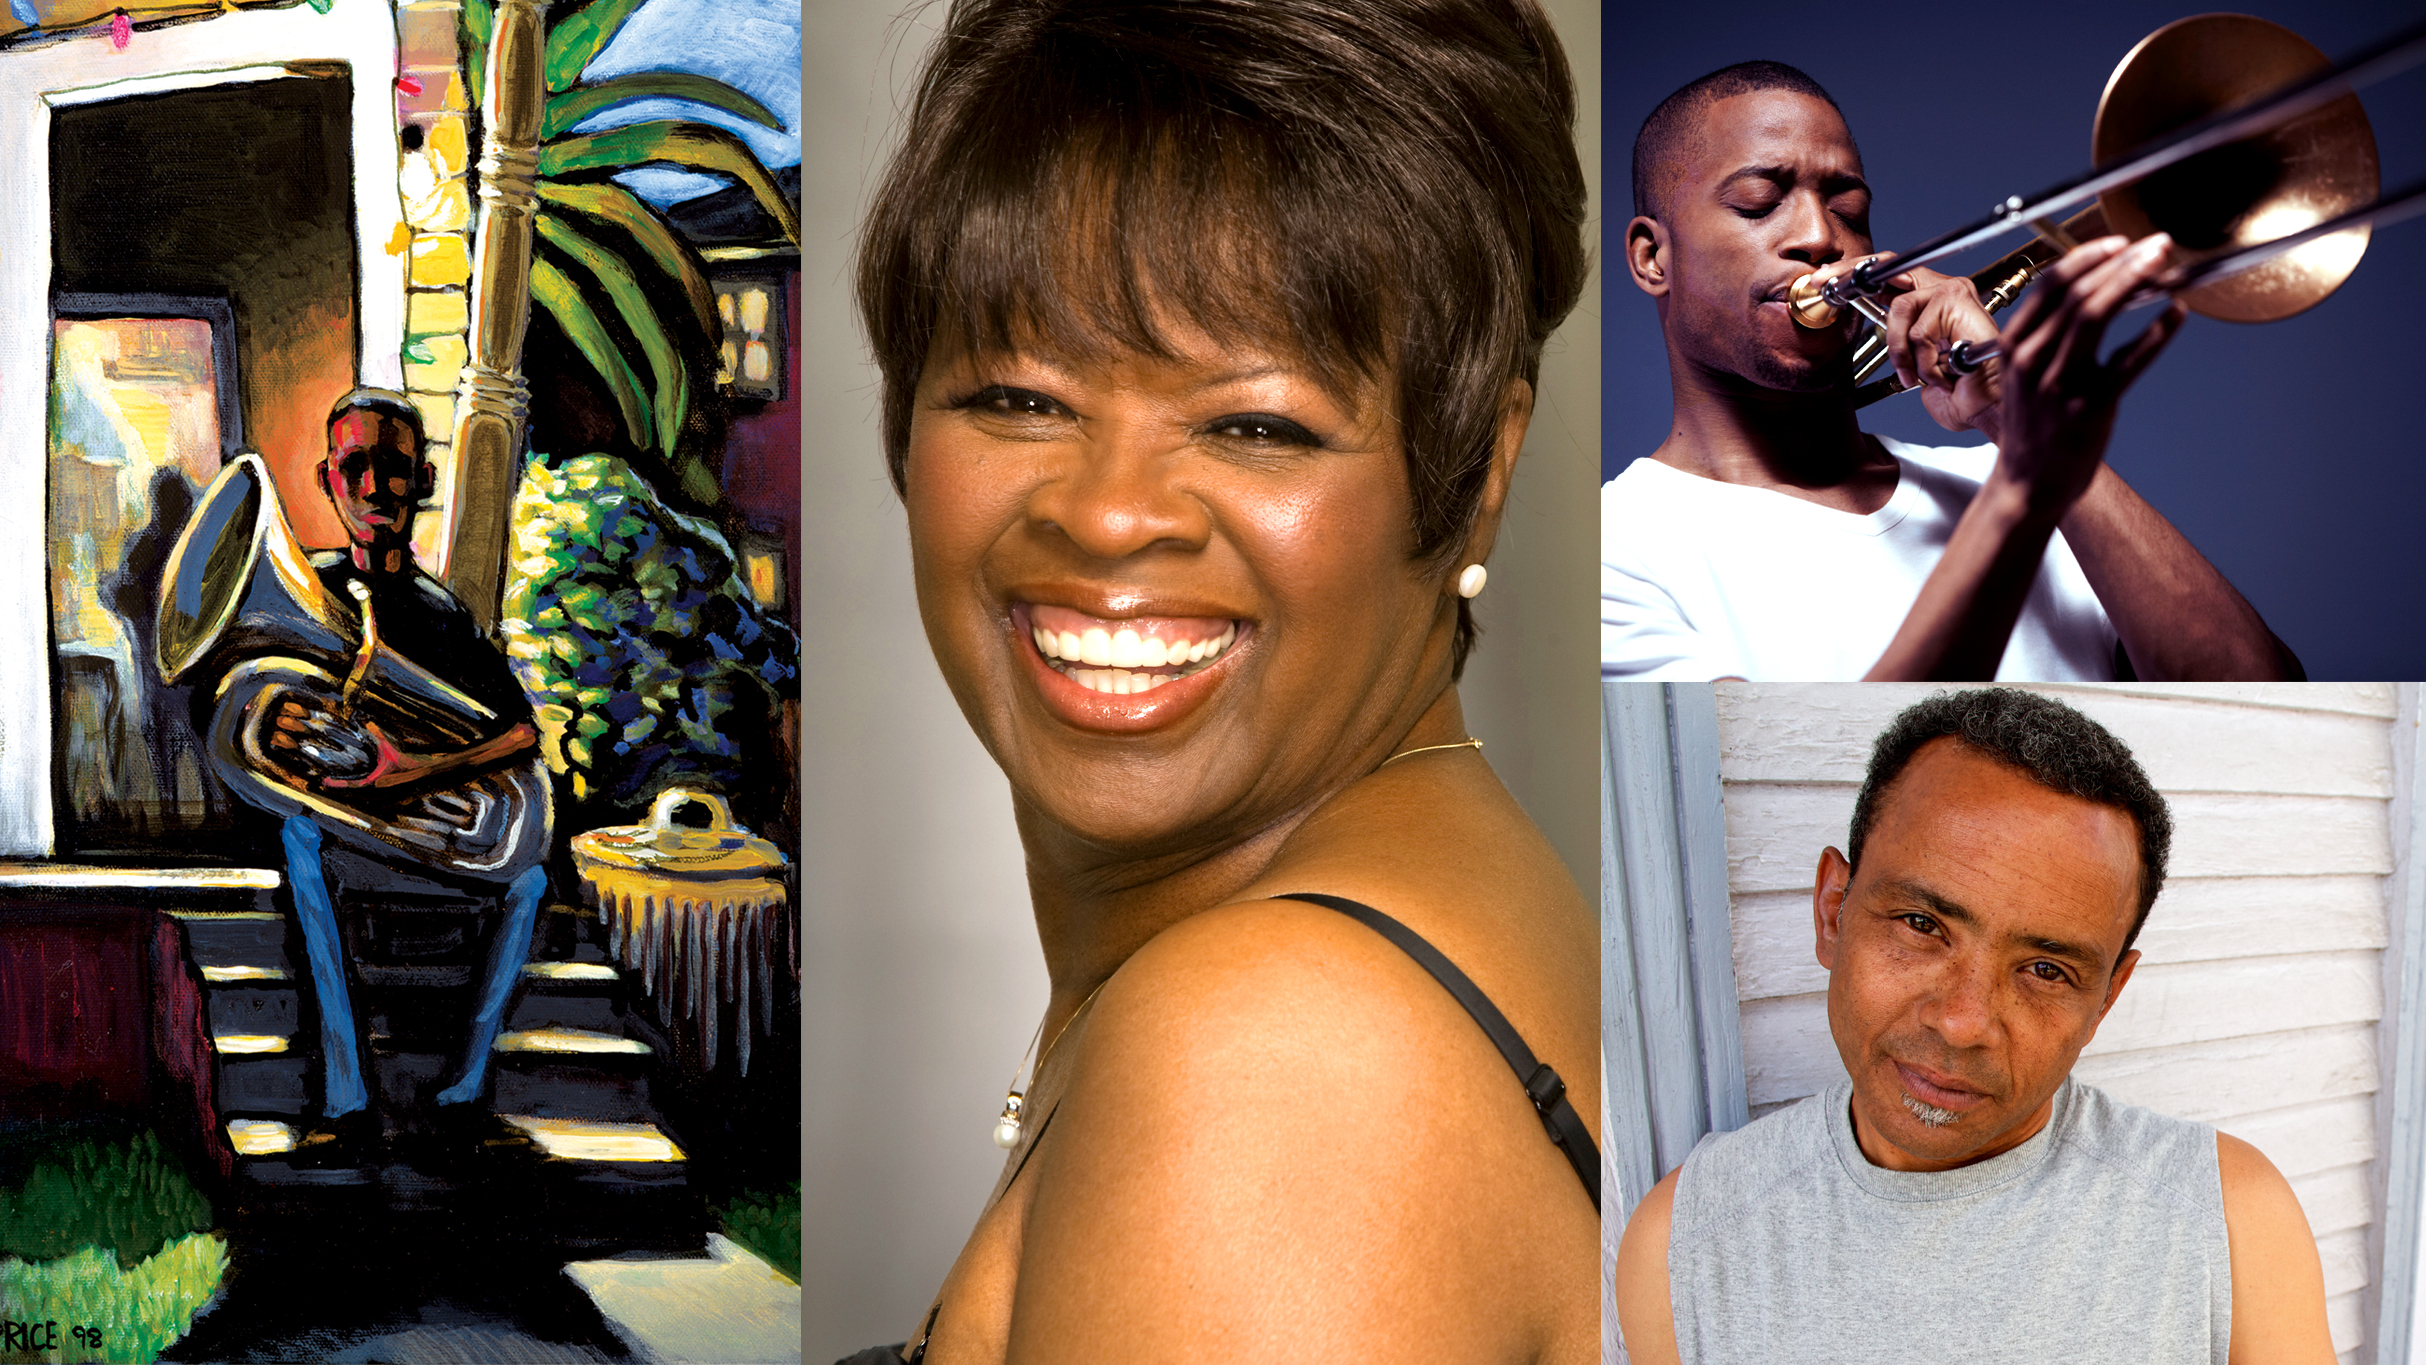 Friday, December 20: Home for the Holidays at House of Blues, featuring Irma Thomas, John Boutte, and Trombone Shorty